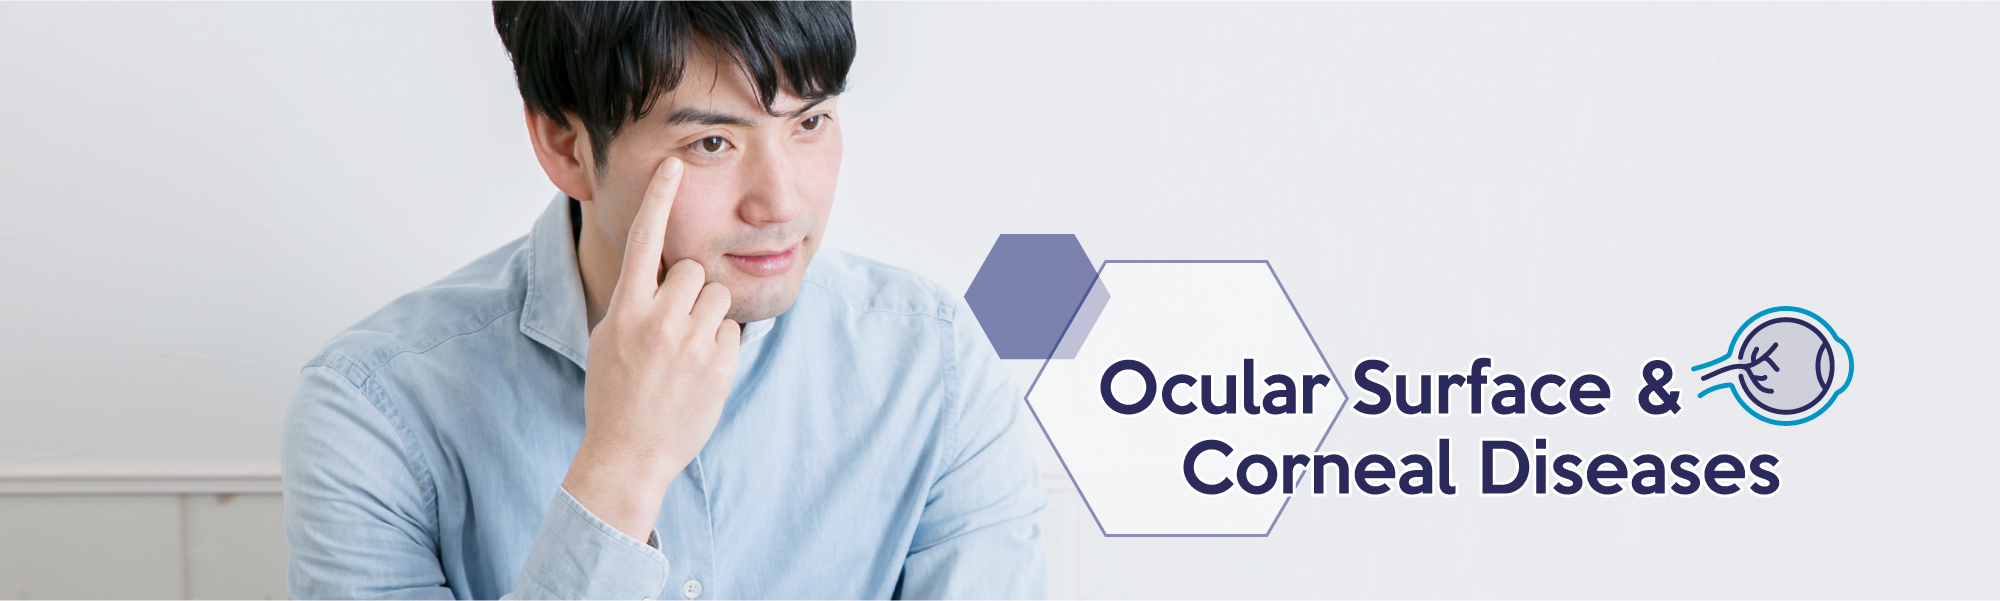 Ocular Surface and Corneal Diseases